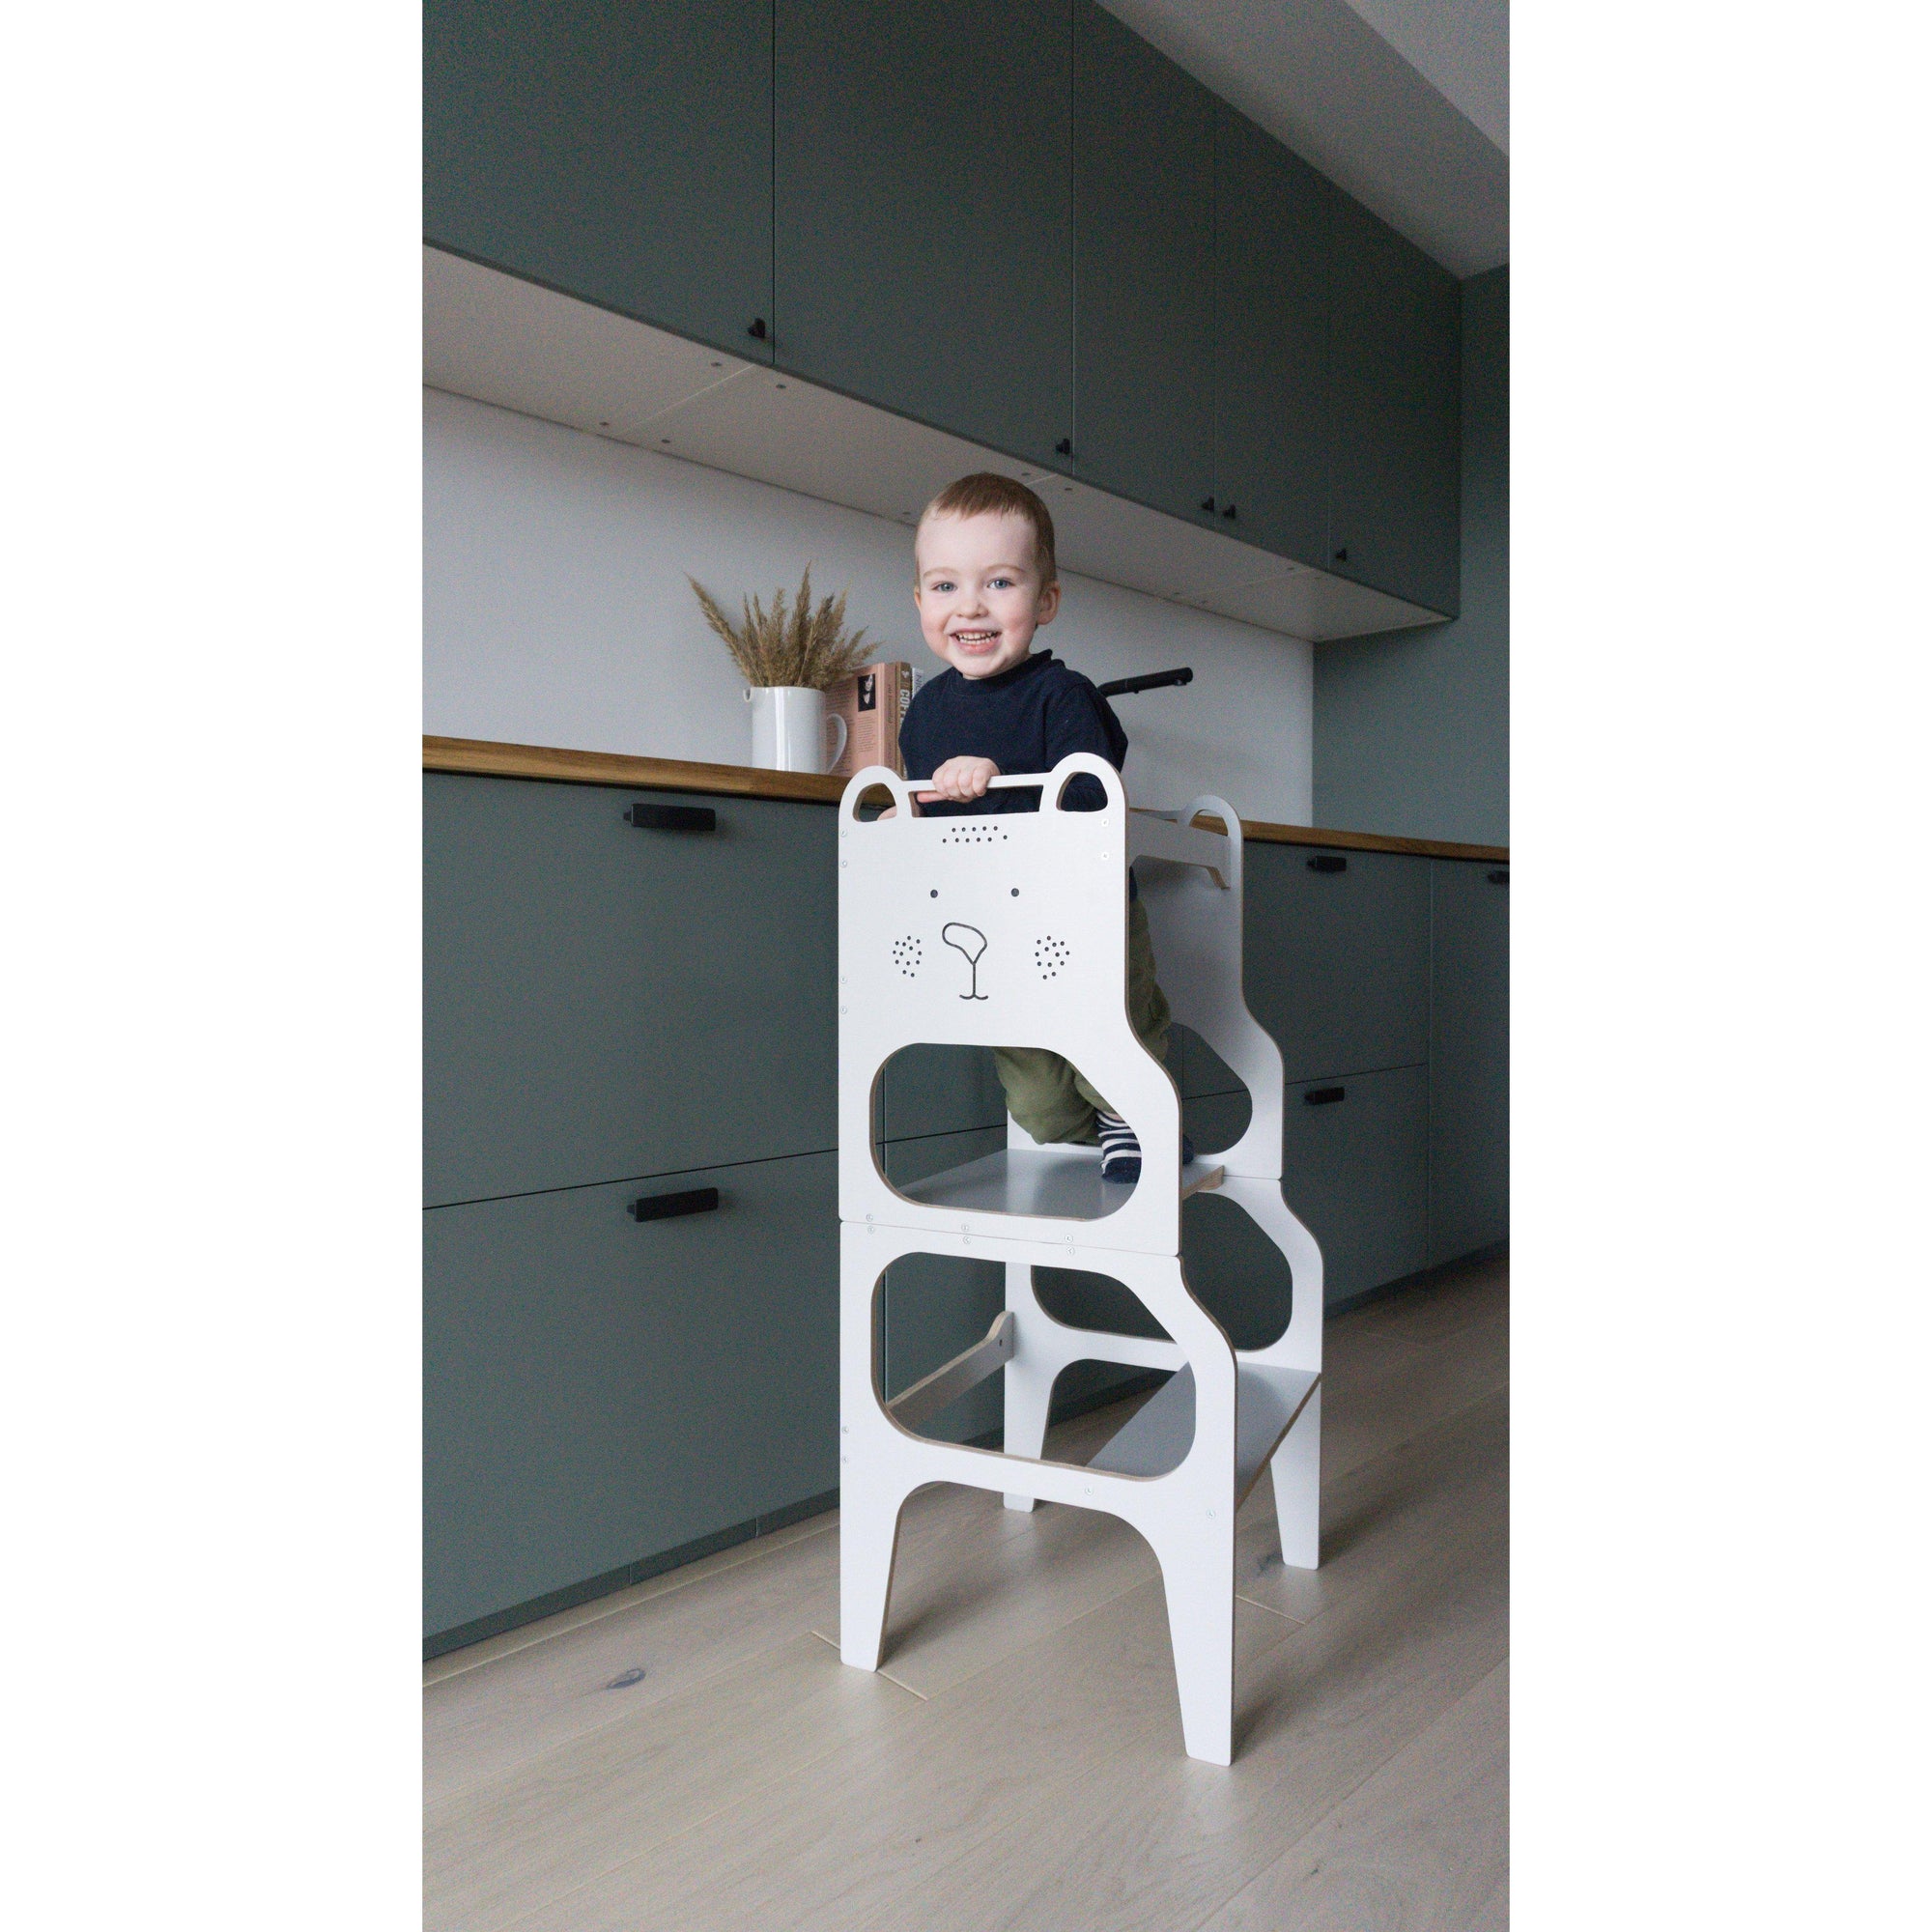 Rugs by Roo | Lakaluk Wooden Teddy Multi-Function Kids Chair Table Learning Tower-1125